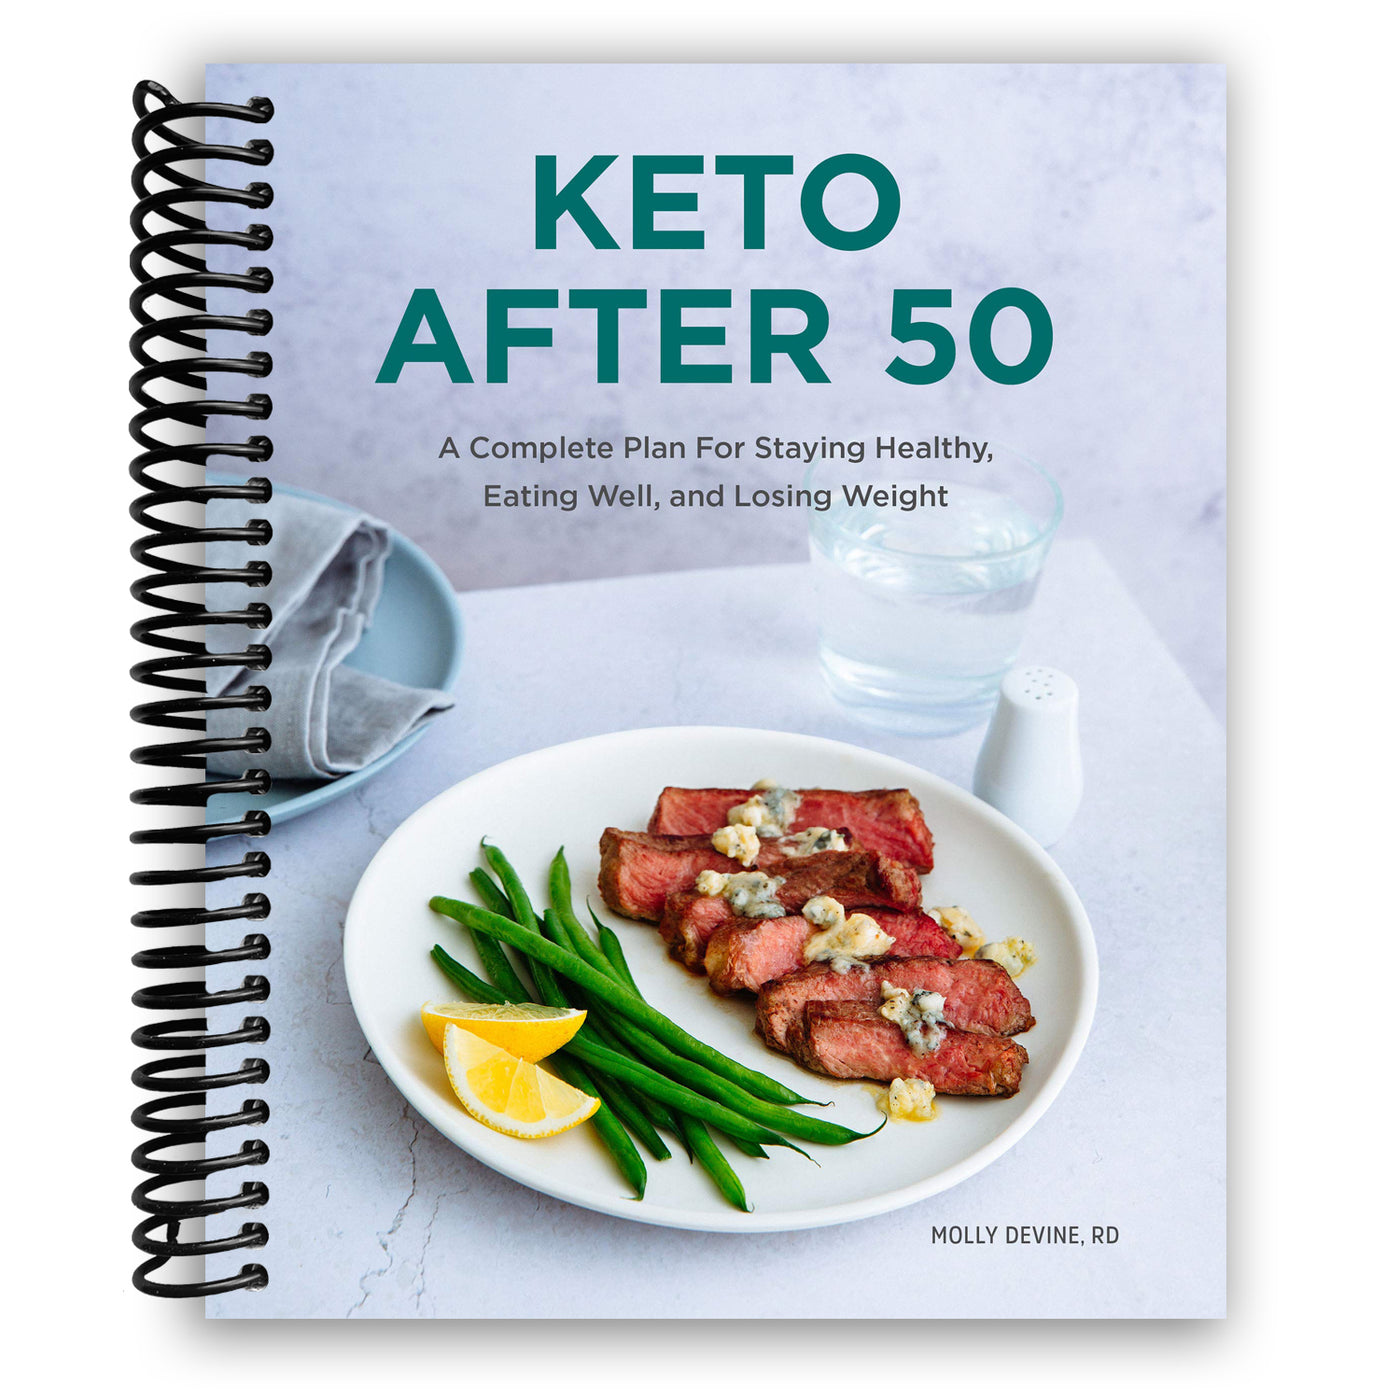 Keto After 50: A Complete Plan For Staying Healthy, Eating Well, and Losing Weight (Spiral Bound)